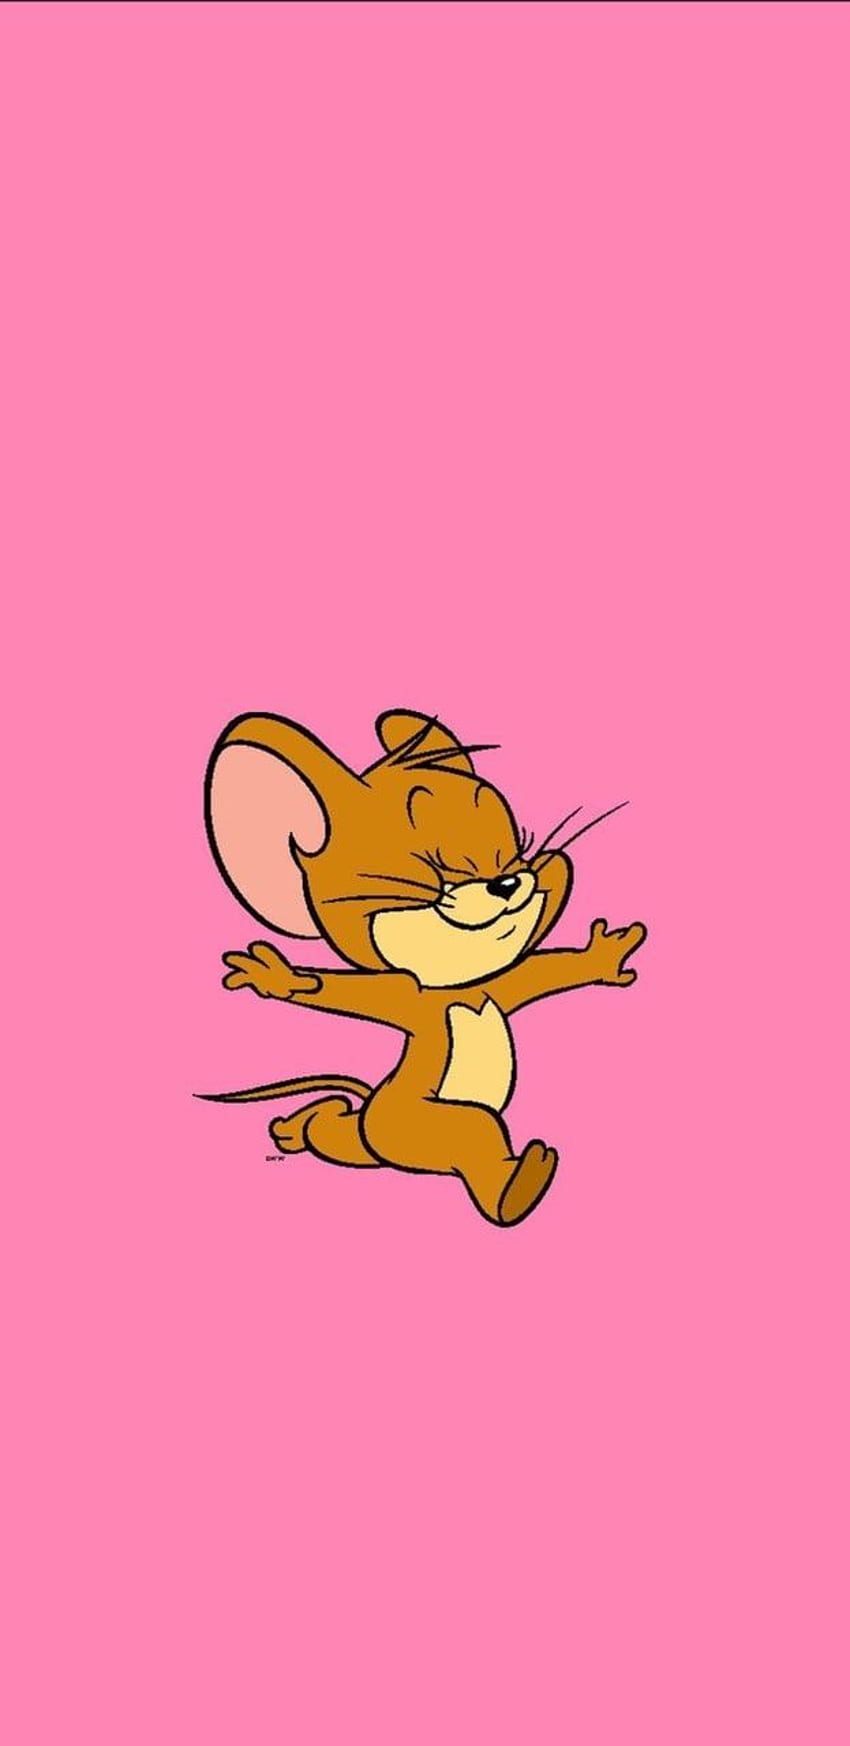 Tom Jerry Wallpapers 51 images